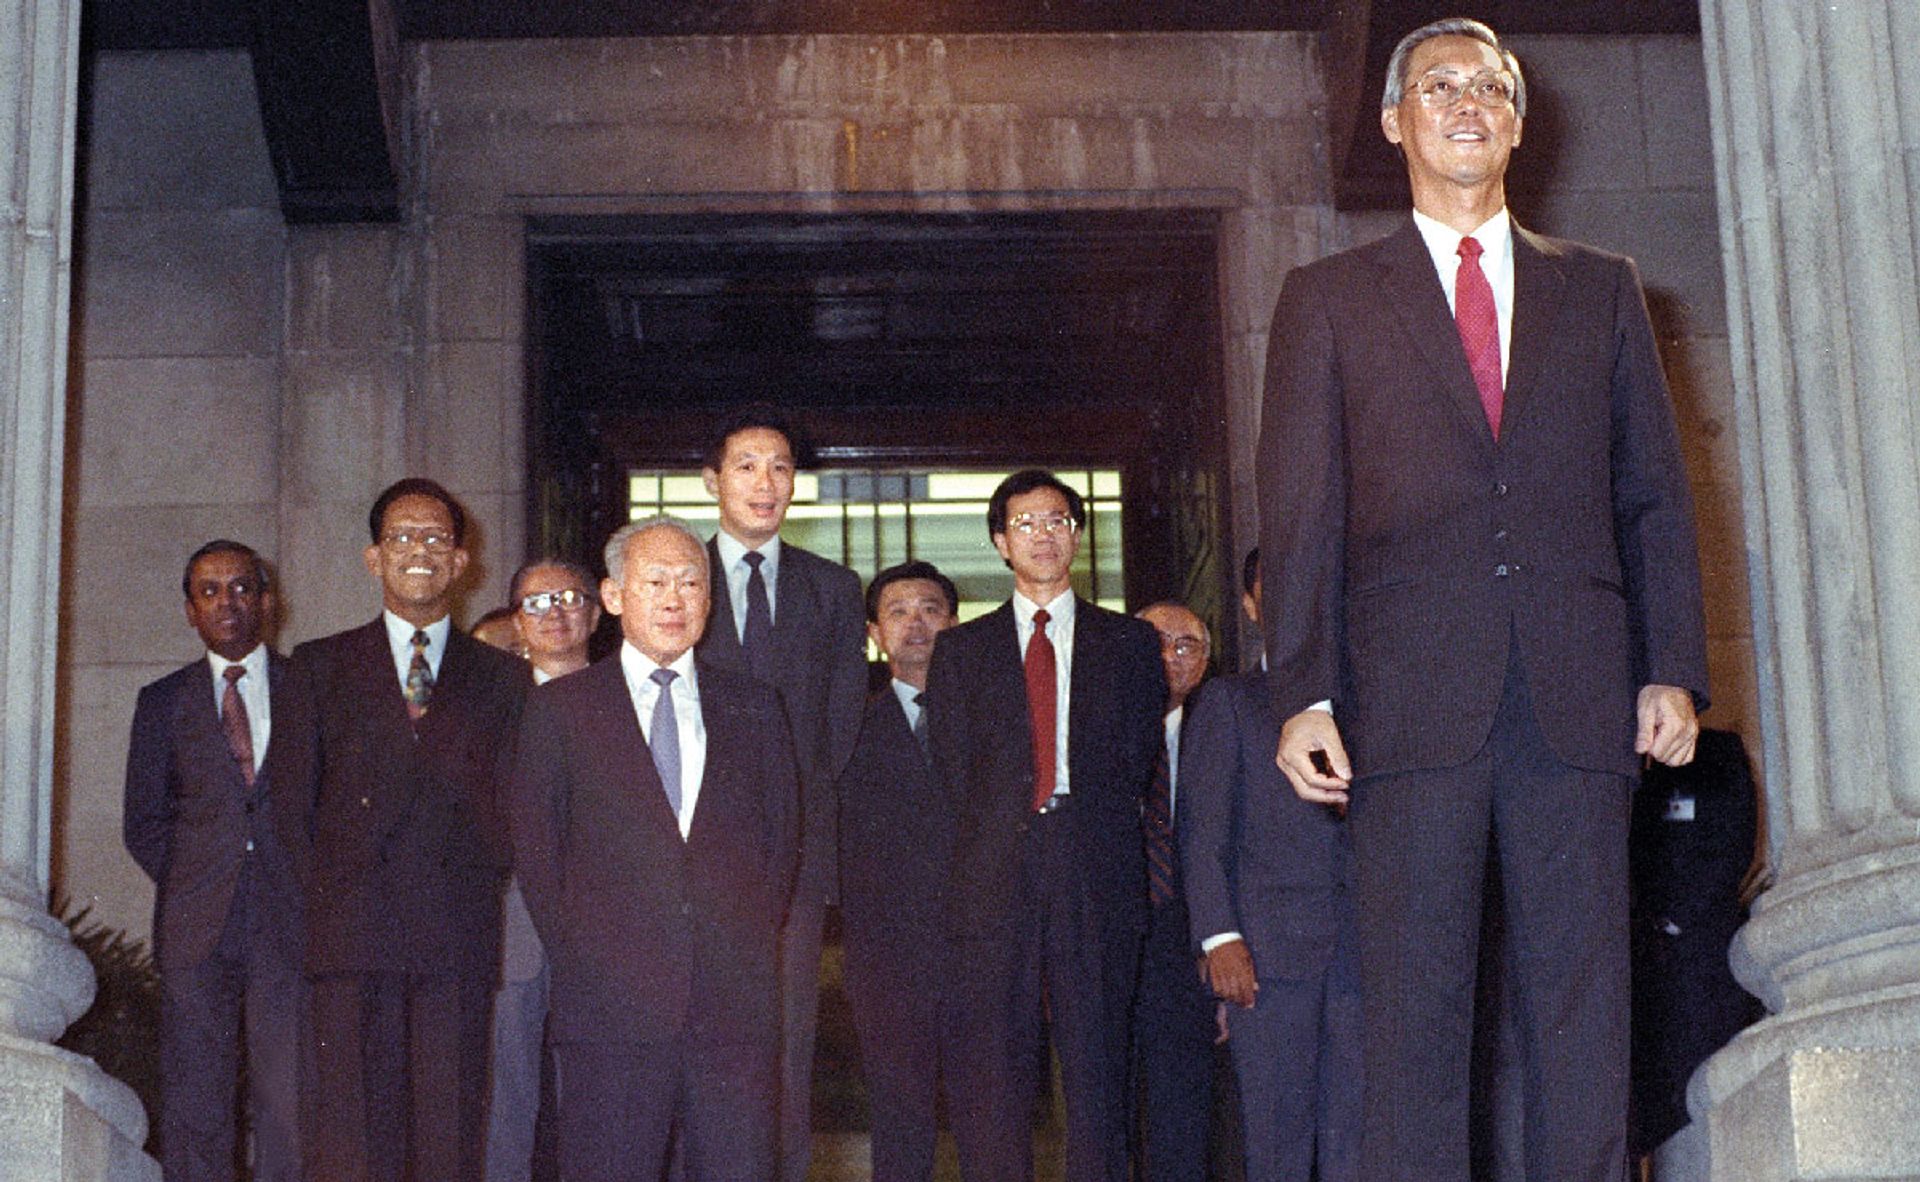 Mr Lee watching as cheering crowds greet his successor, Mr Goh Chok Tong (right), after Mr Goh took his oath of office at City Hall to become Singapore’s second prime minister on Nov 28, 1990. Mr Lee remained in Cabinet as Senior Minister. Political renewal was a key task that Mr Lee had set for himself since the early 1970s to ensure a smooth, orderly transition to the next generation of leaders. ST Photo: Jacky Ho